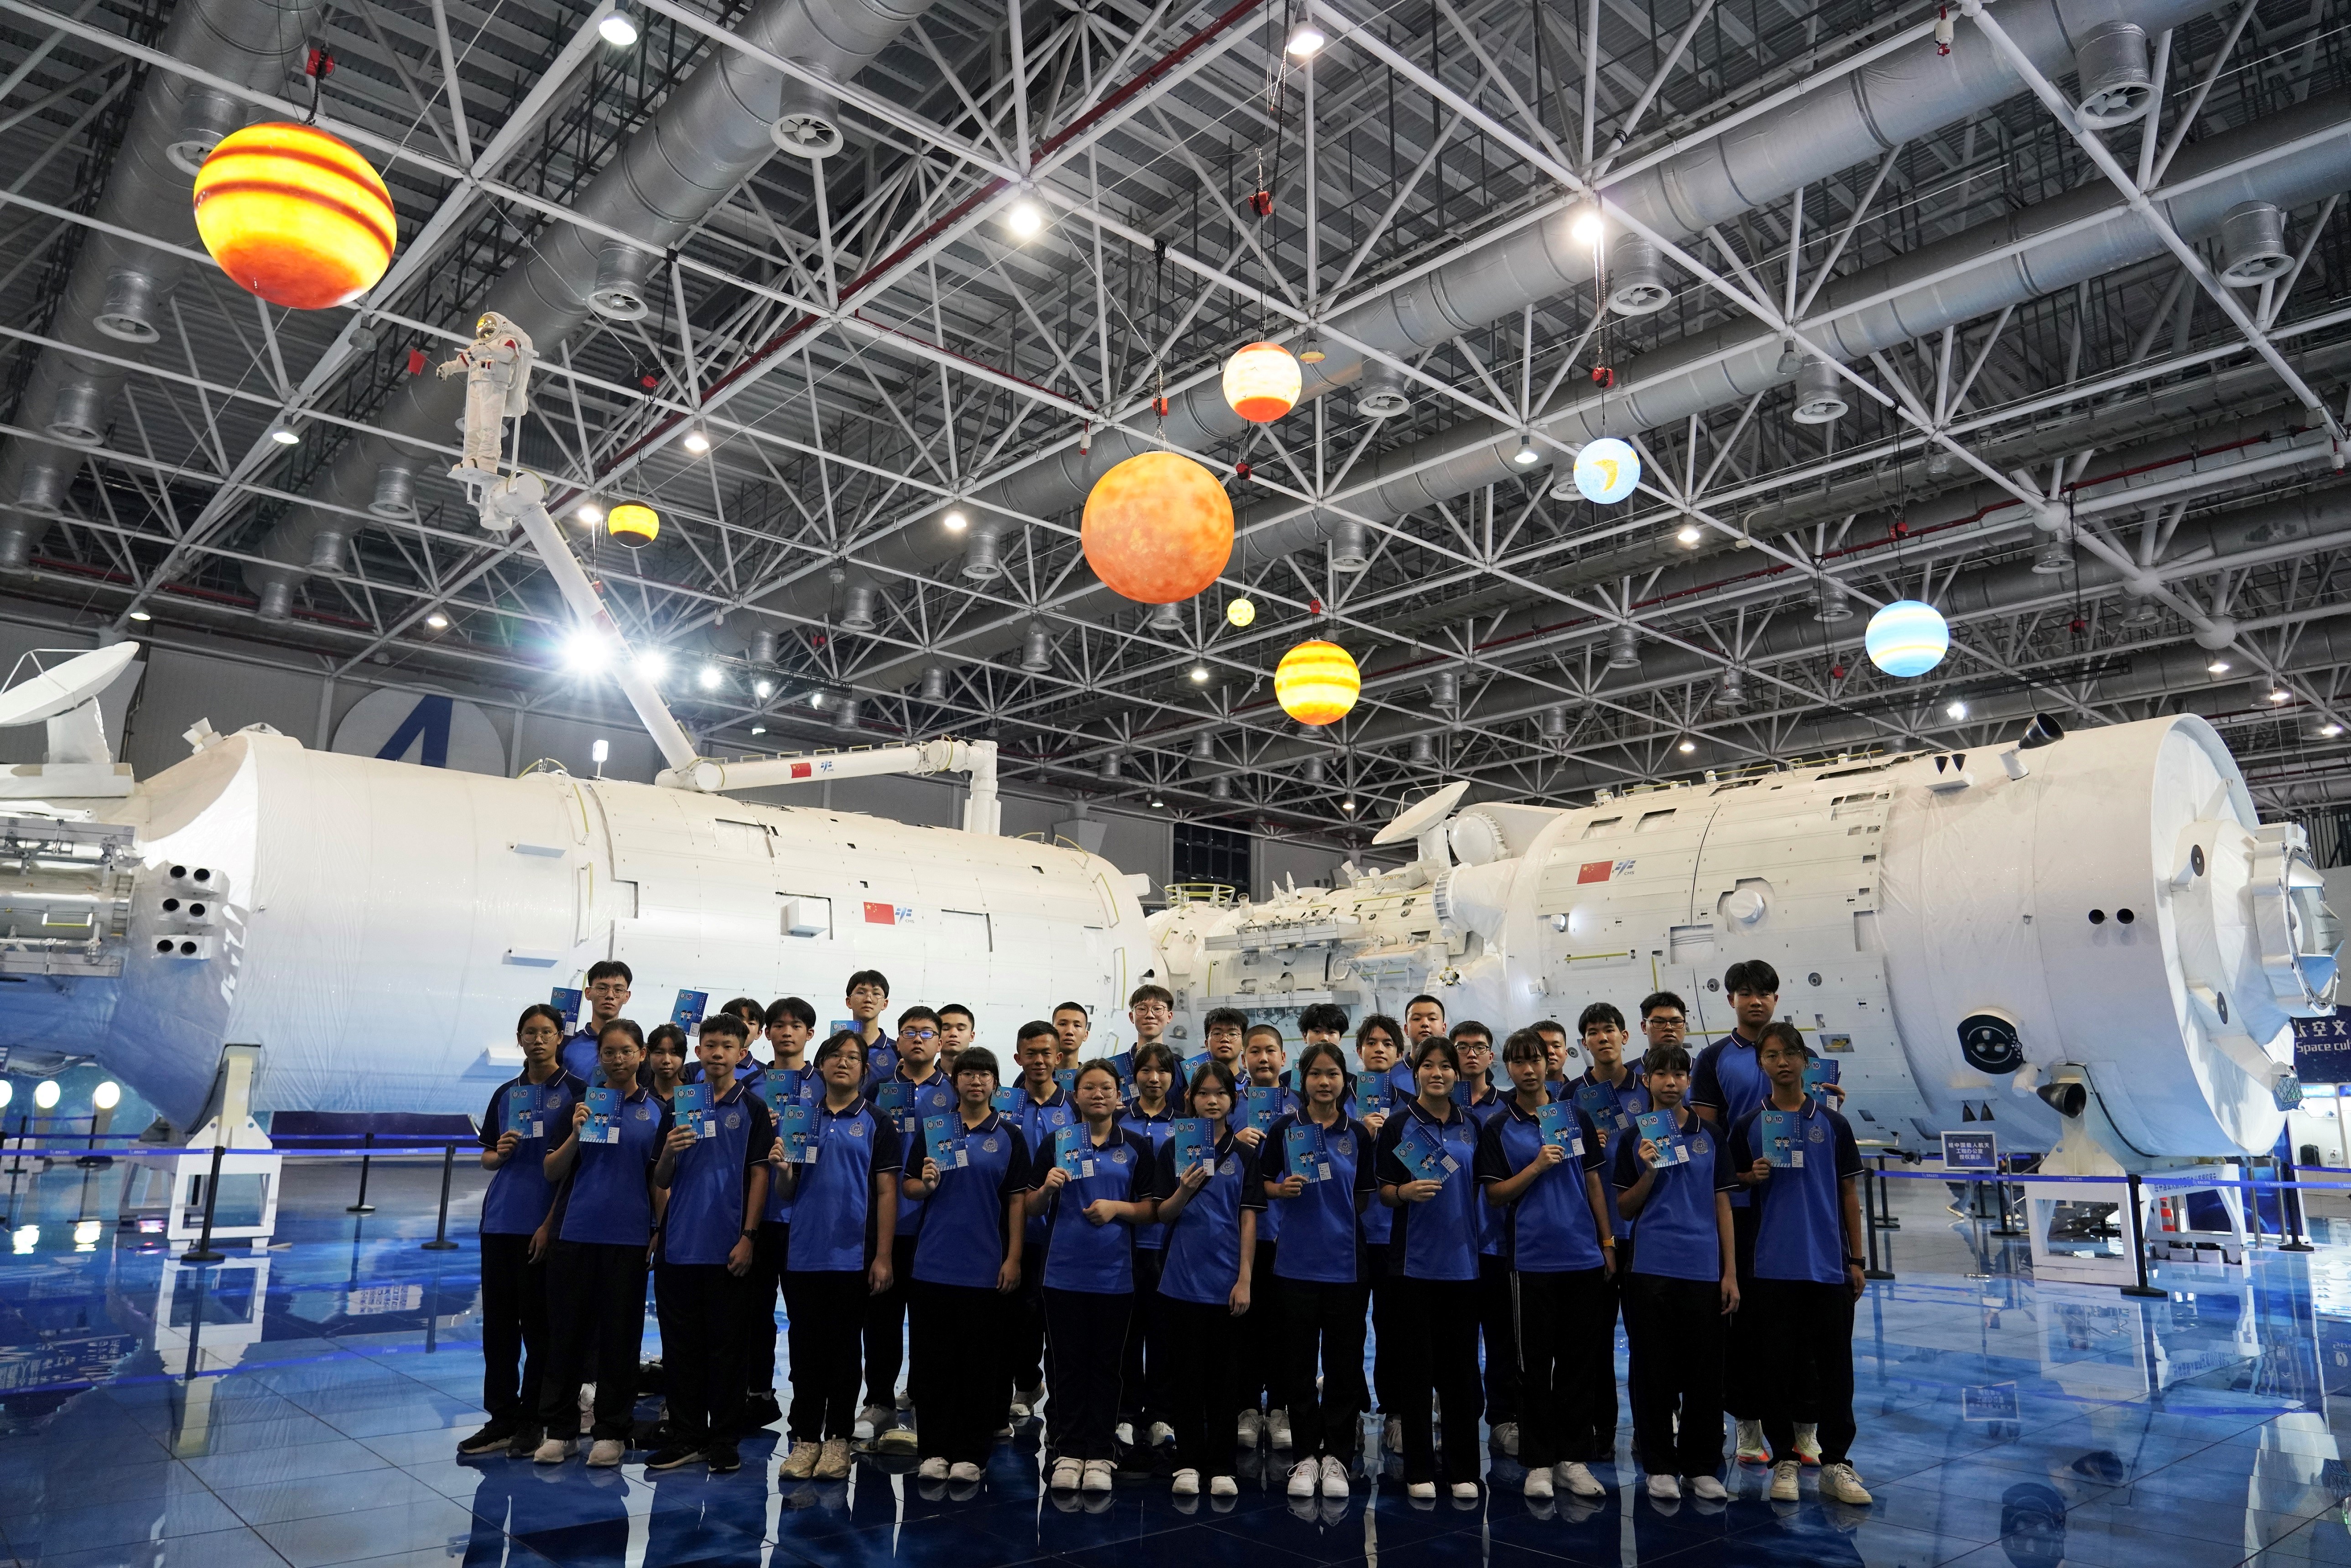 Members of the Immigration Department Youth Leaders Corps visited the replica of the 